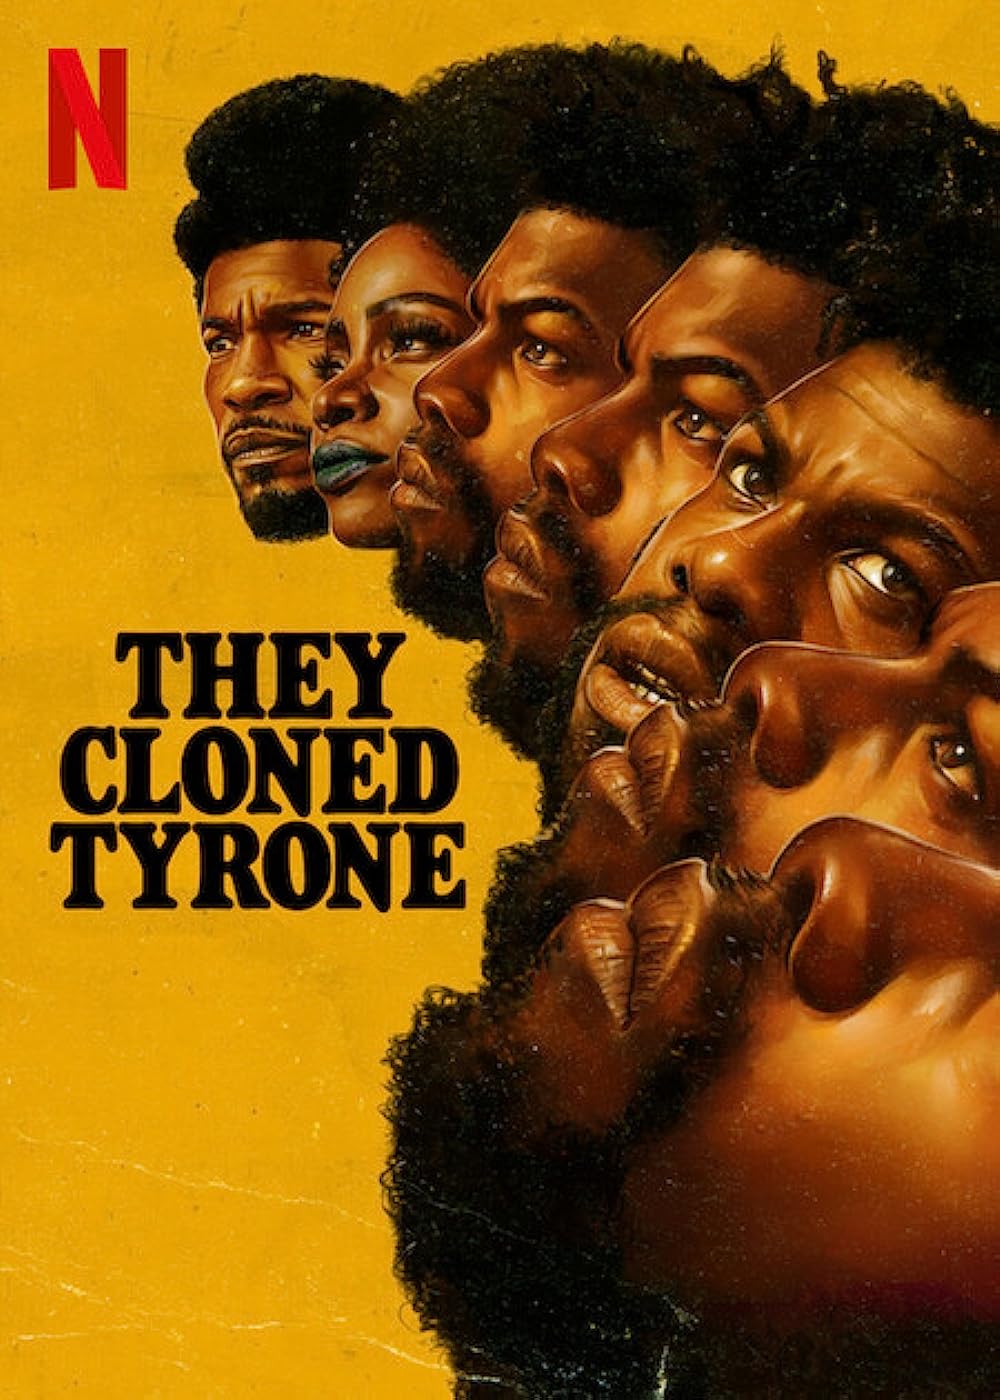 They Clone Tyrone (Streaming on Netflix): Unravel the mystery in this sci-fi comedy as three curious individuals stumble upon a dangerous conspiracy involving human cloning and illegal experimentation.